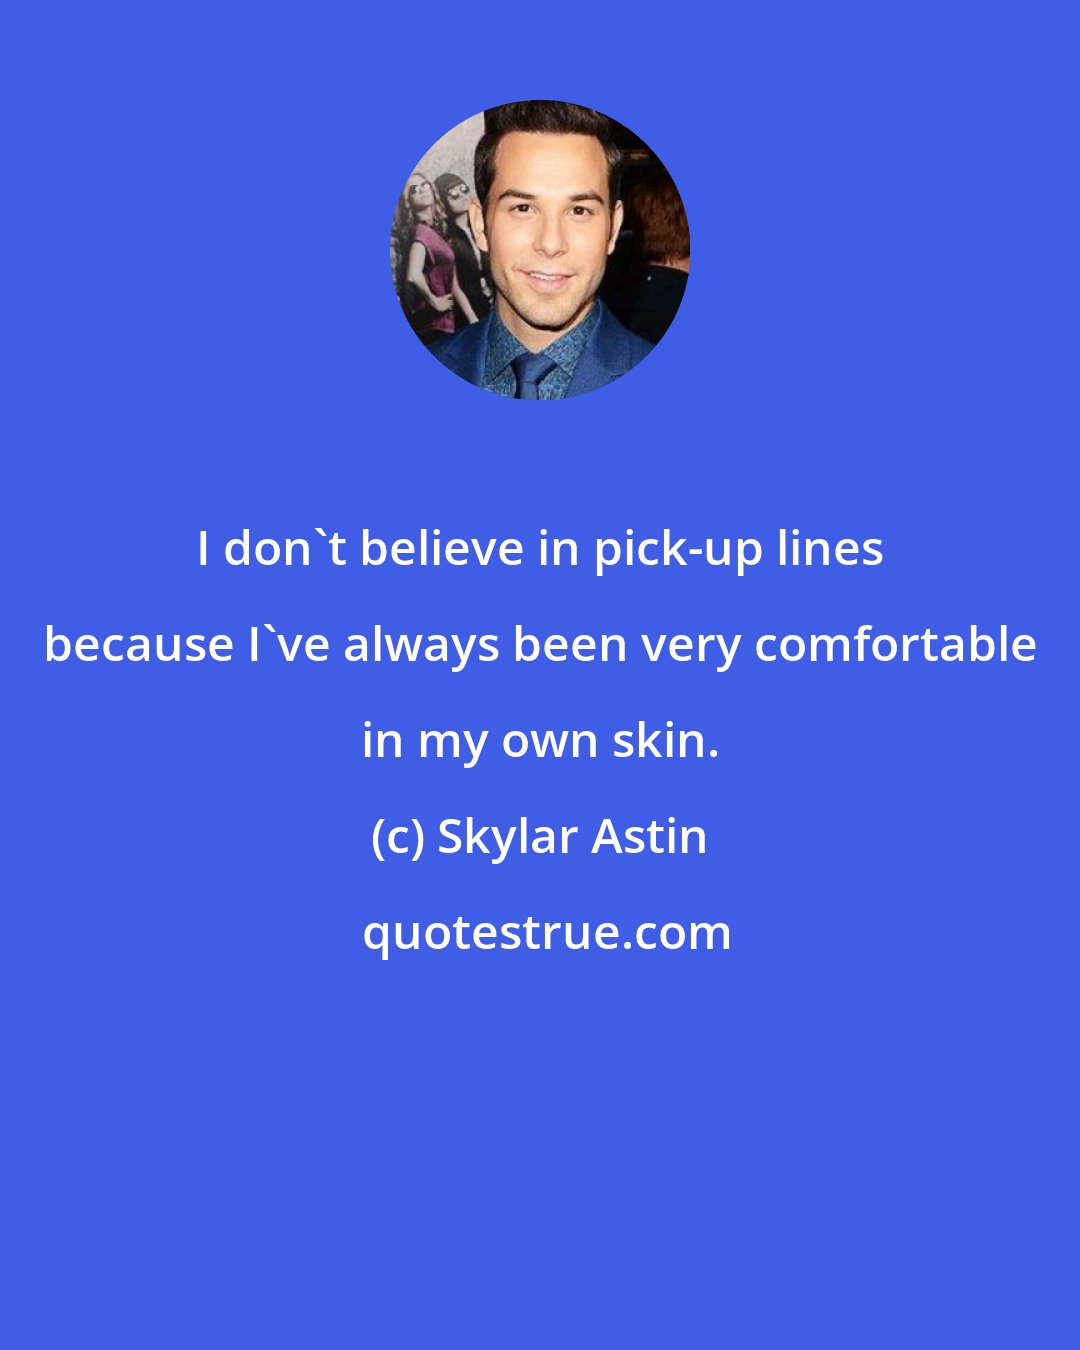 Skylar Astin: I don't believe in pick-up lines because I've always been very comfortable in my own skin.